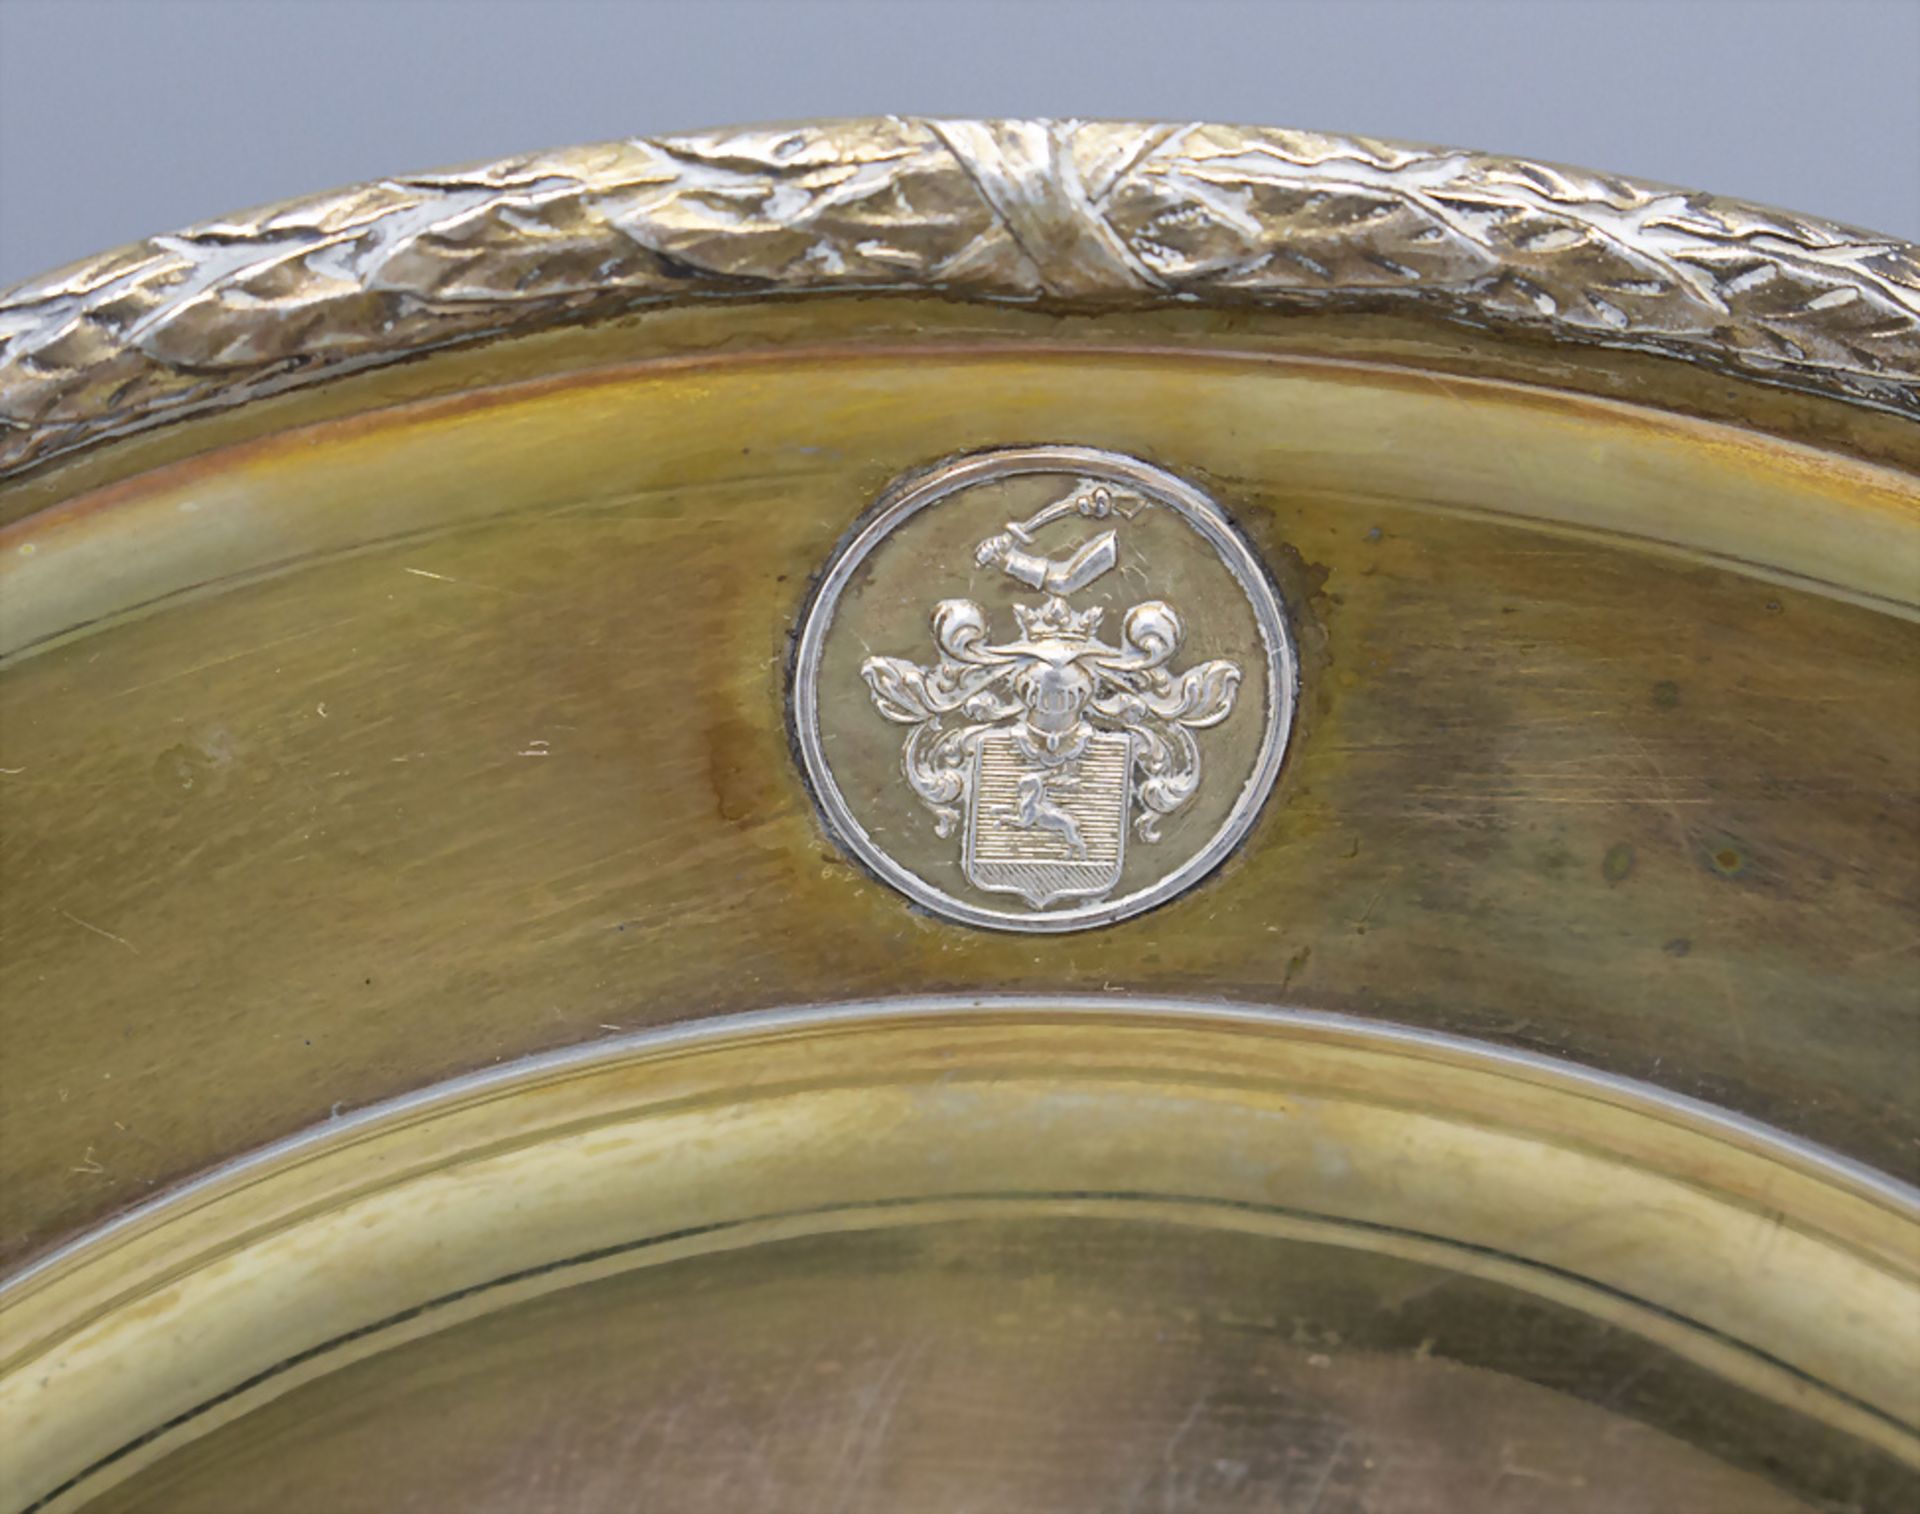 Prunkteller mit Adelswappen / A guilded silver plate with coat of arms, Gebr. Friedländer, ... - Image 2 of 4